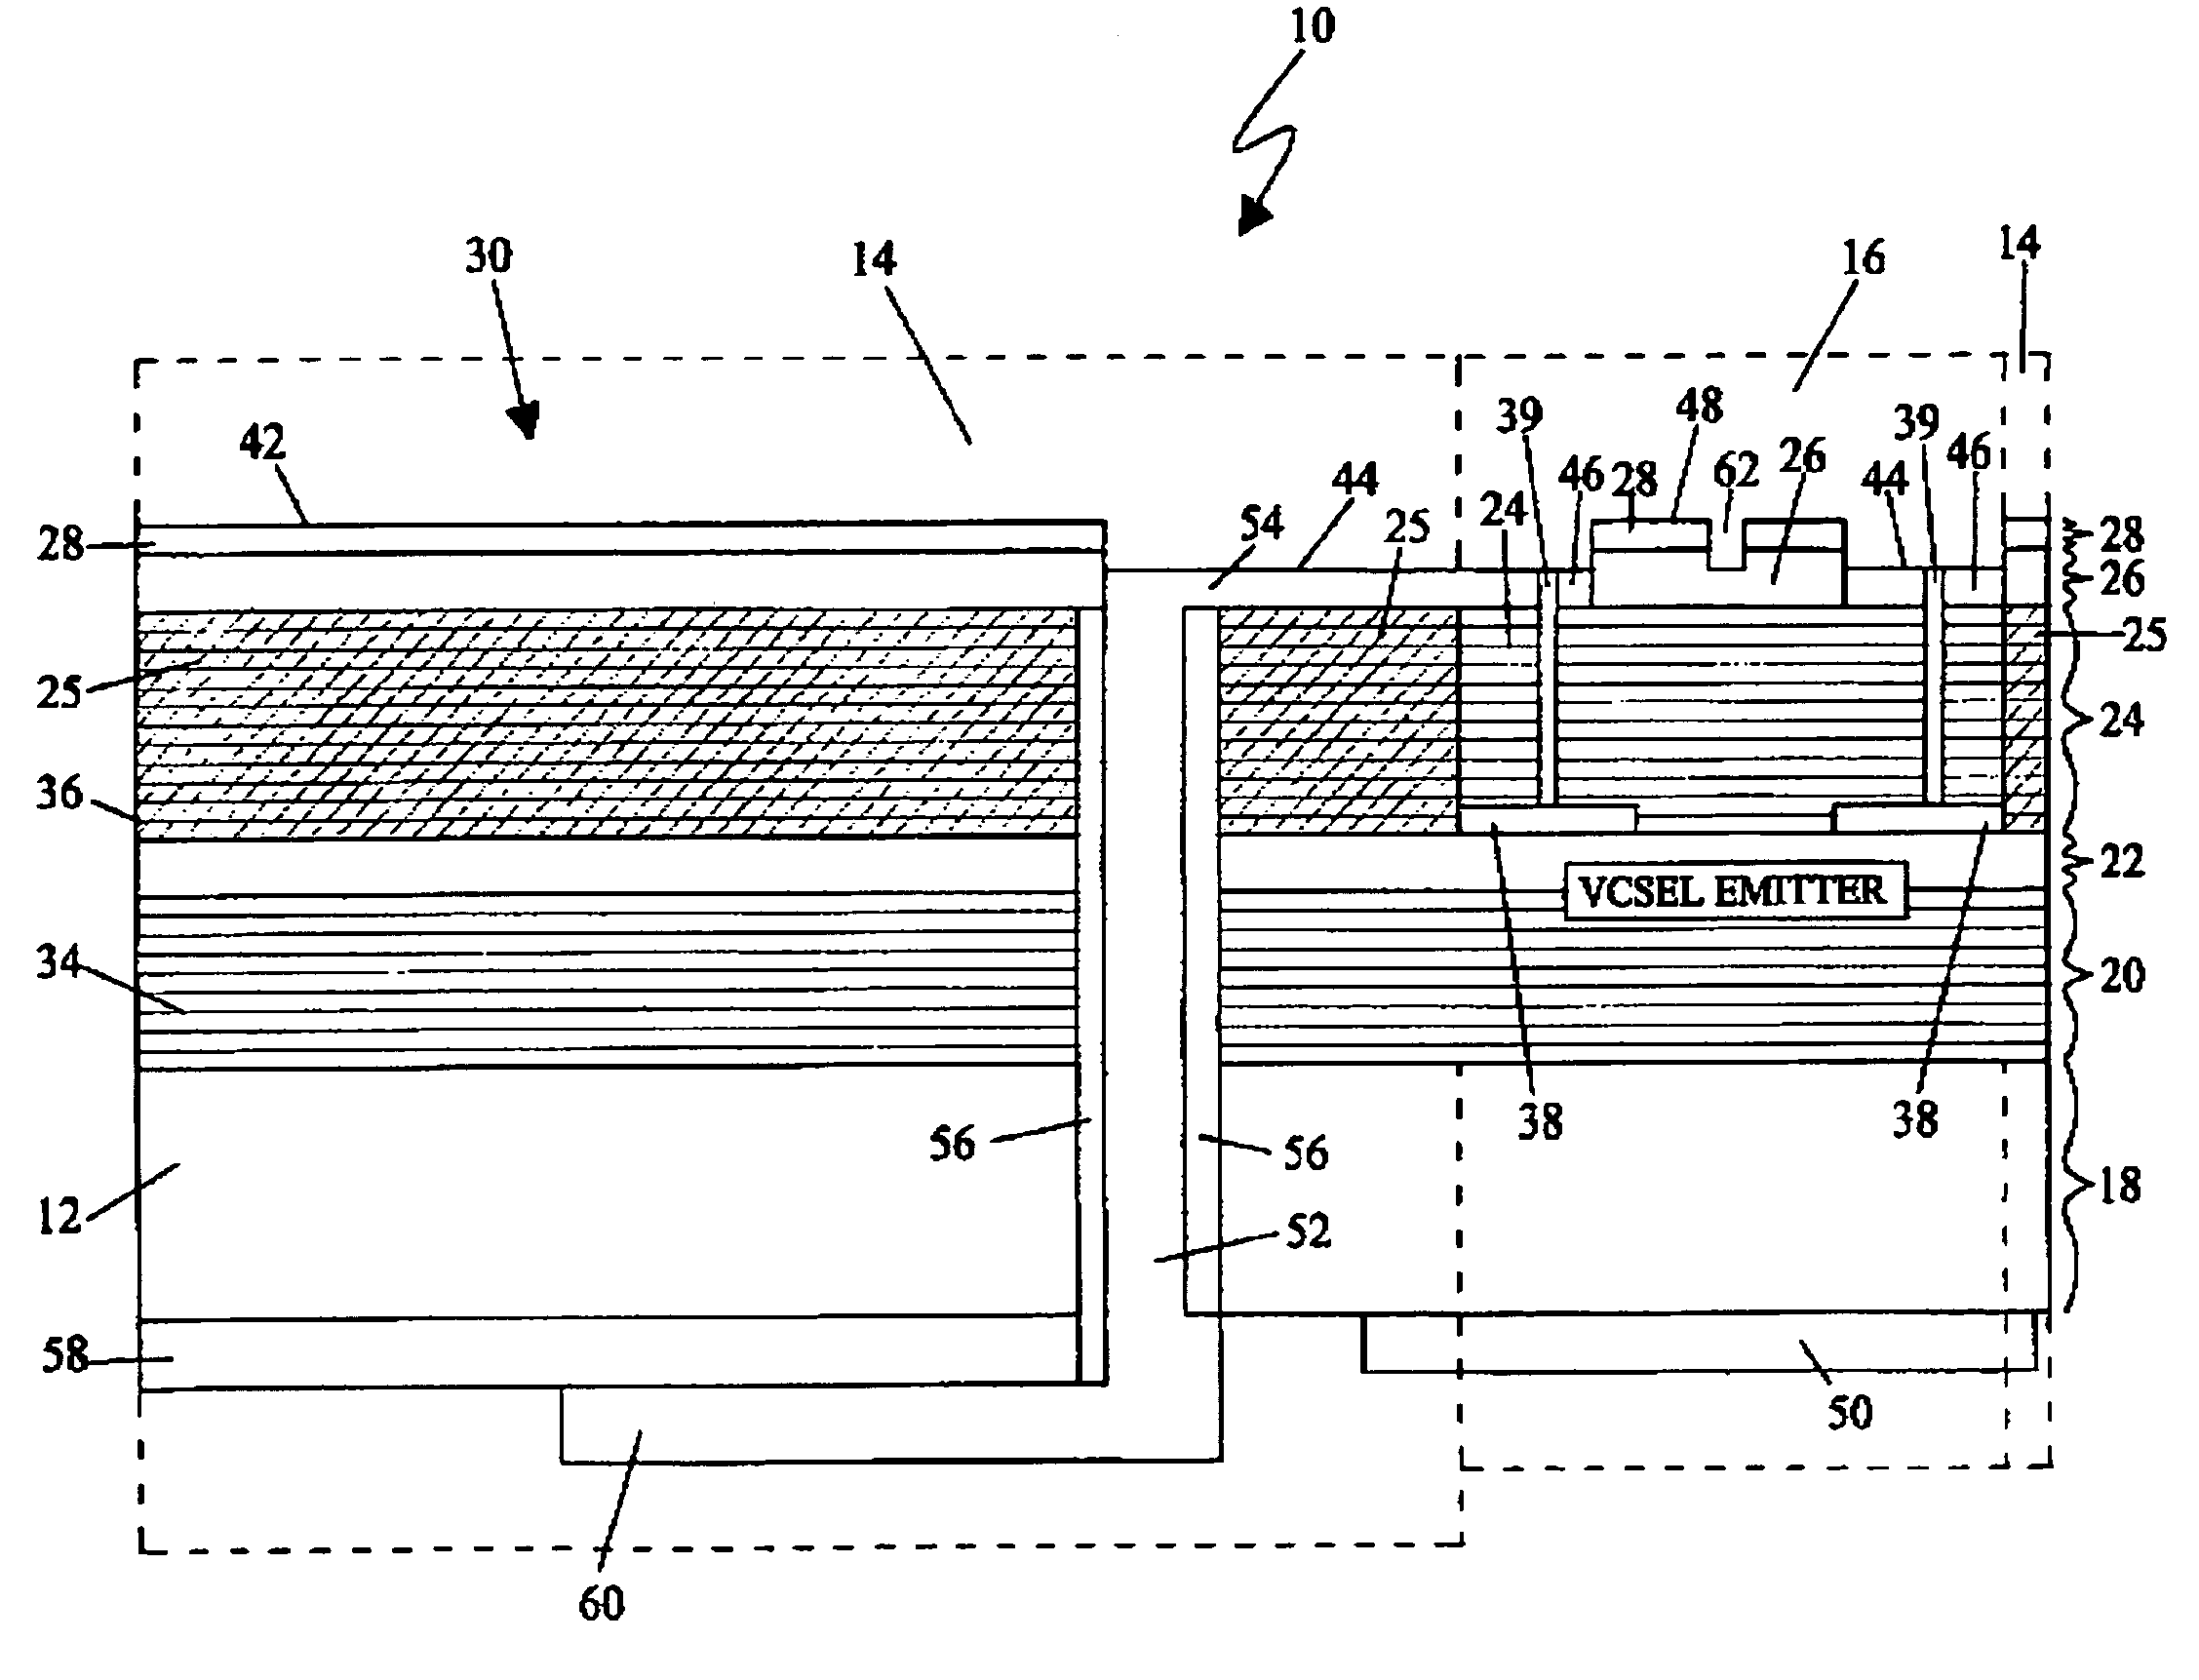 Near-field optical head system with integrated slider and laser